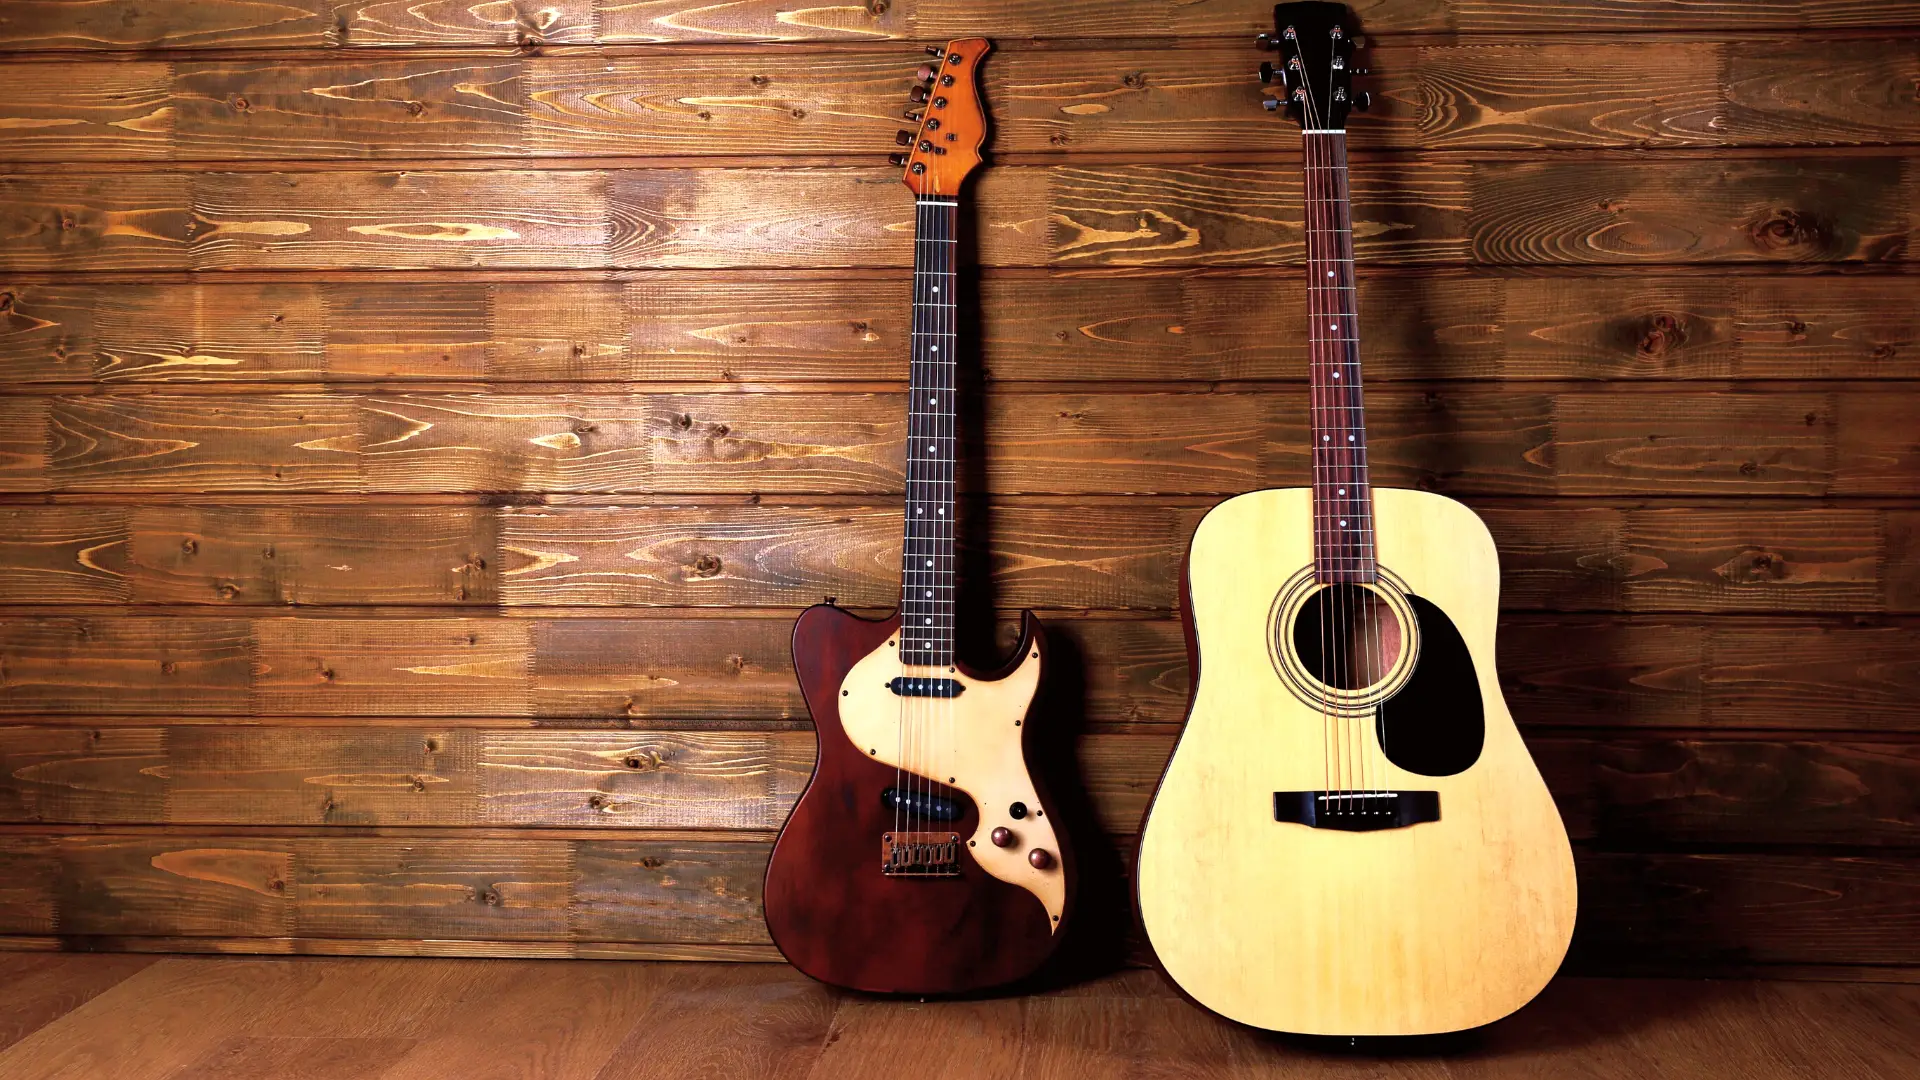 Guitar body and wood types: what to look for when buying a guitar [full guide]